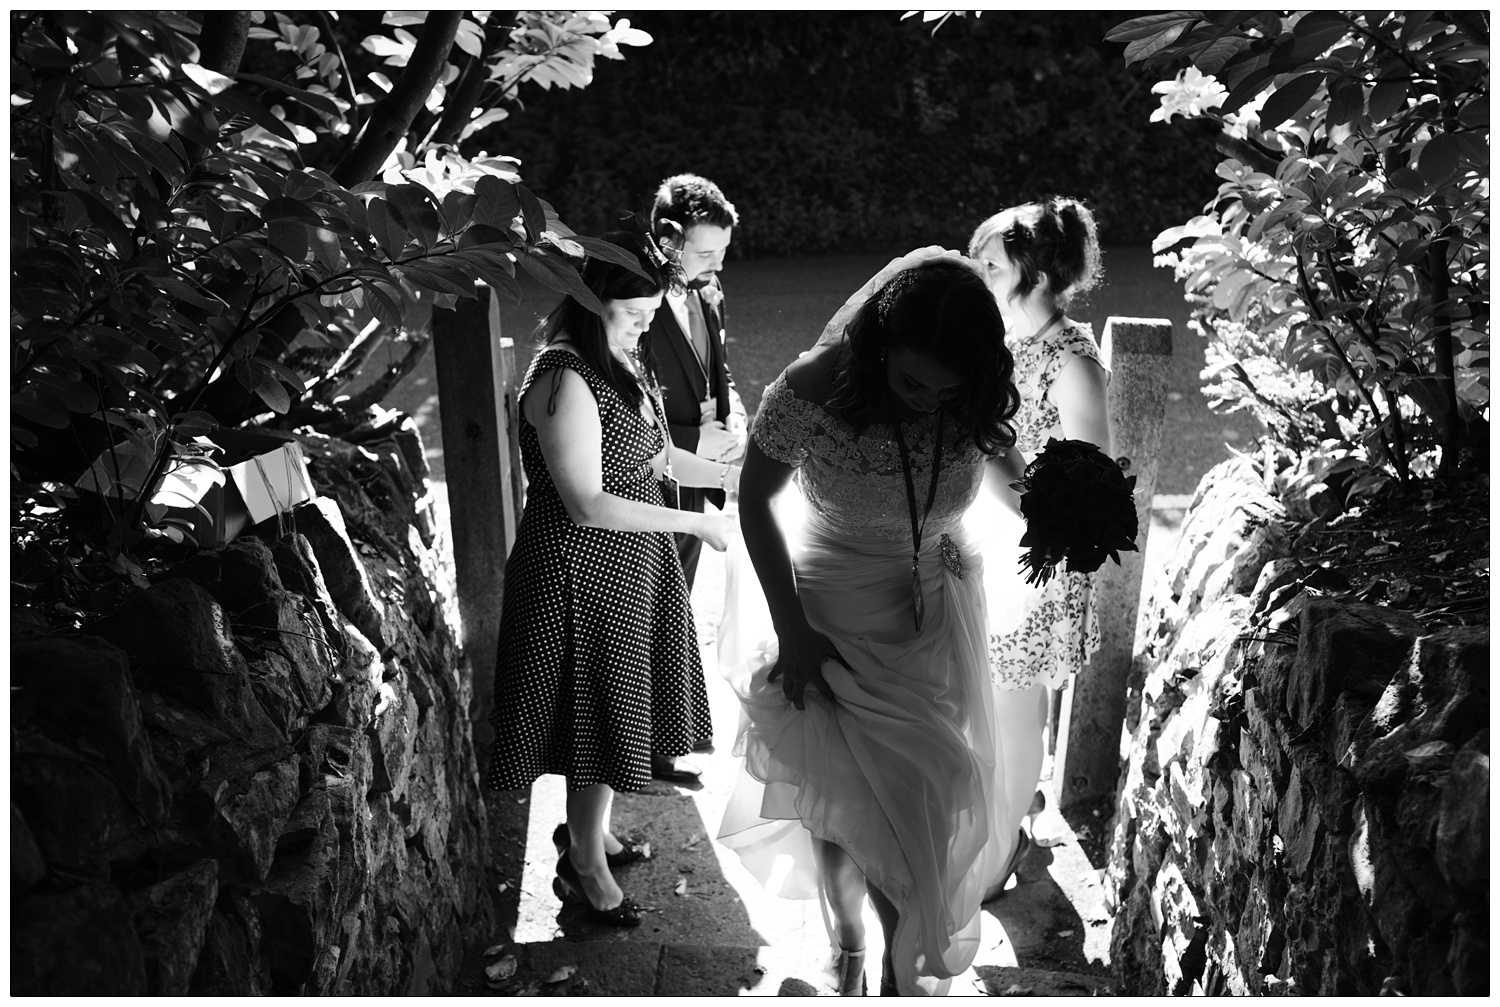 A woman in a wedding dress walking up stone steps to the family home, where her wedding reception will take place. In Chew Magna.